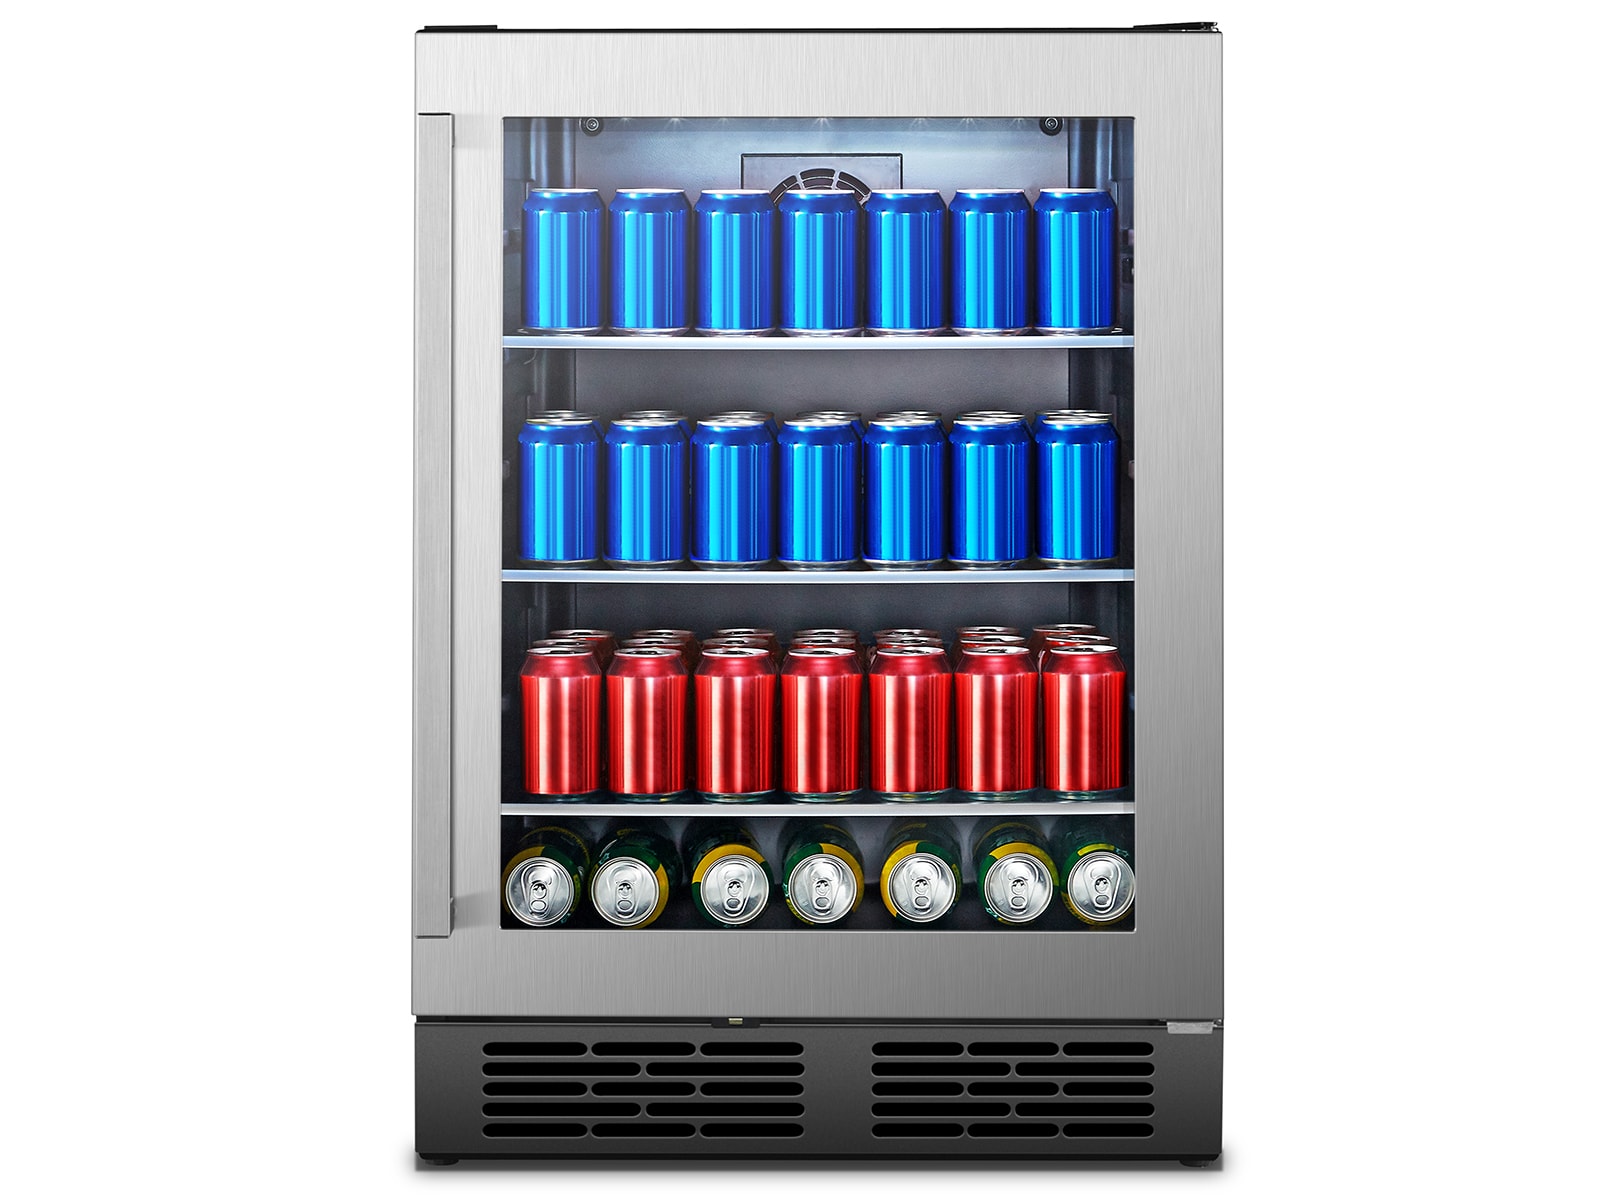 Hisense 23.43-in W 140-Can Capacity Stainless Steel Built-In/Freestanding  Beverage Refrigerator with Glass Door